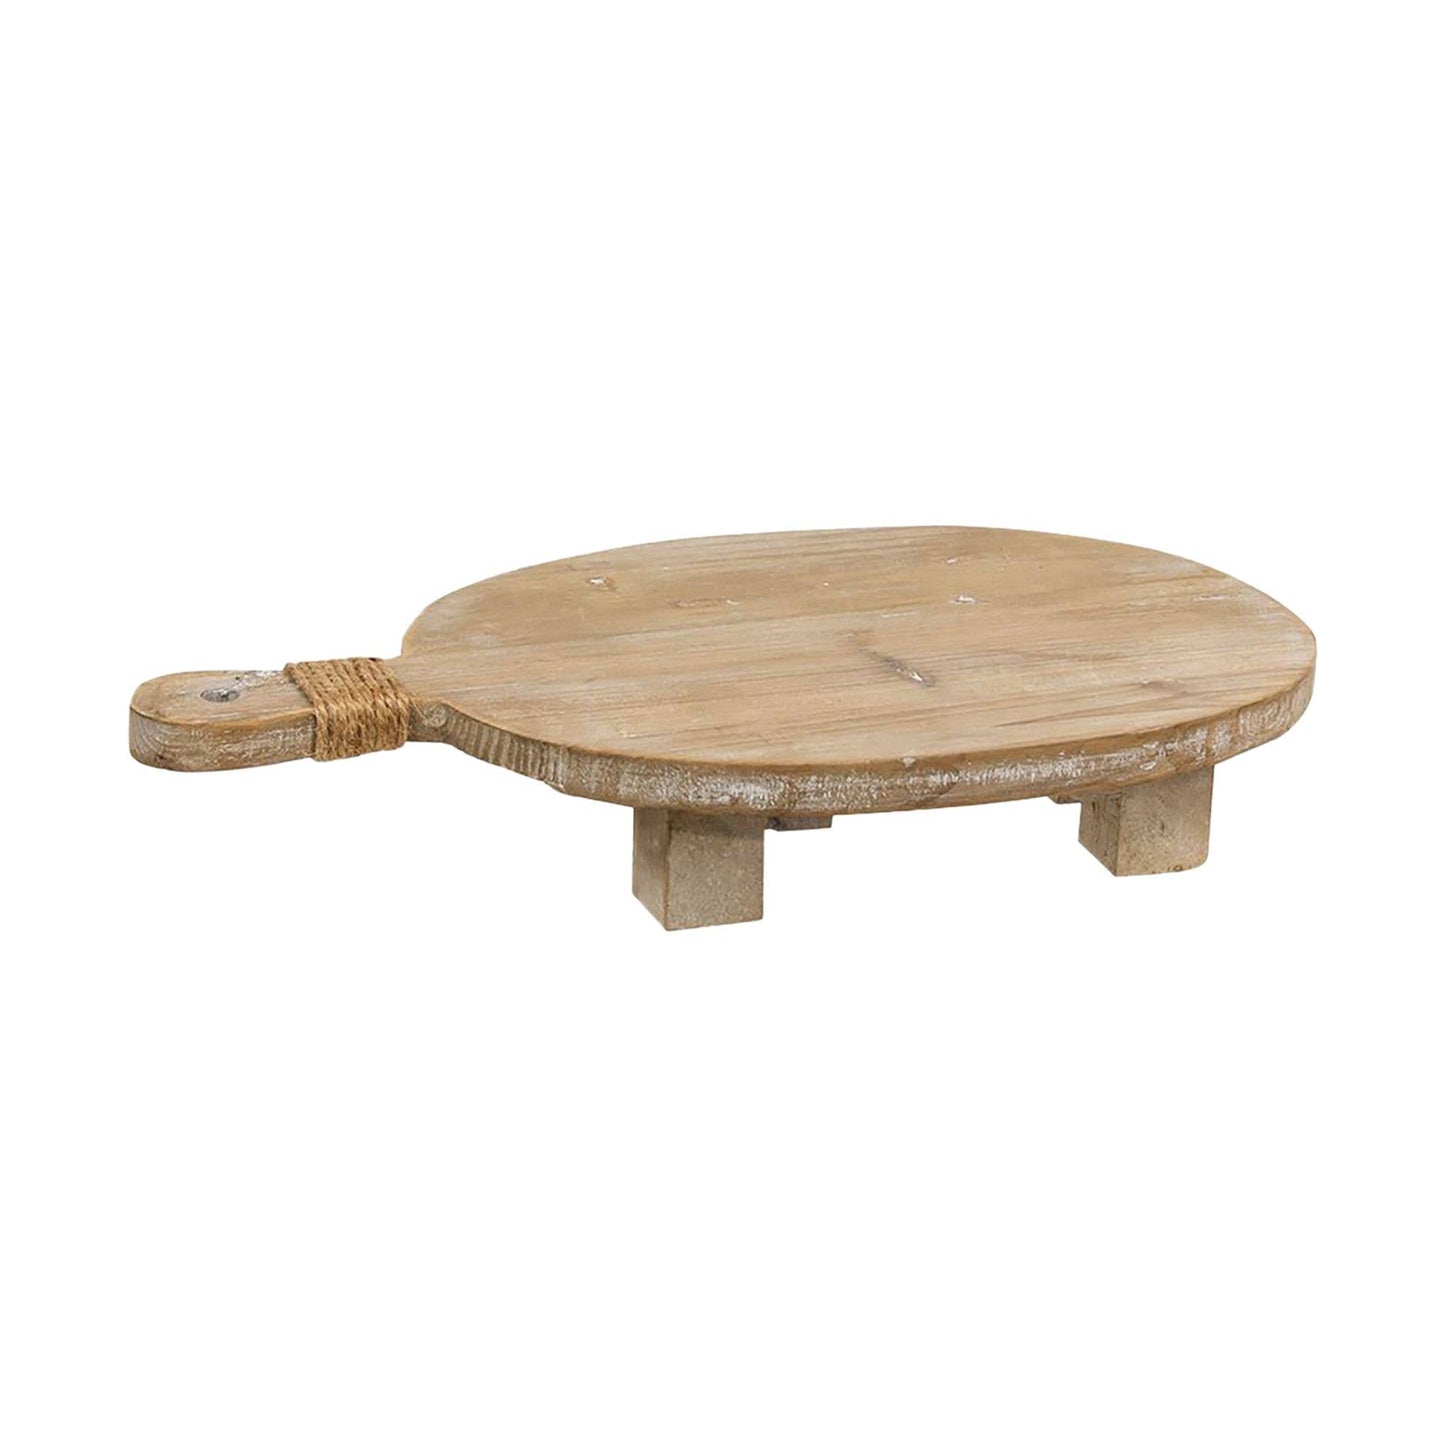 Oval Wood Riser with Jute Handle